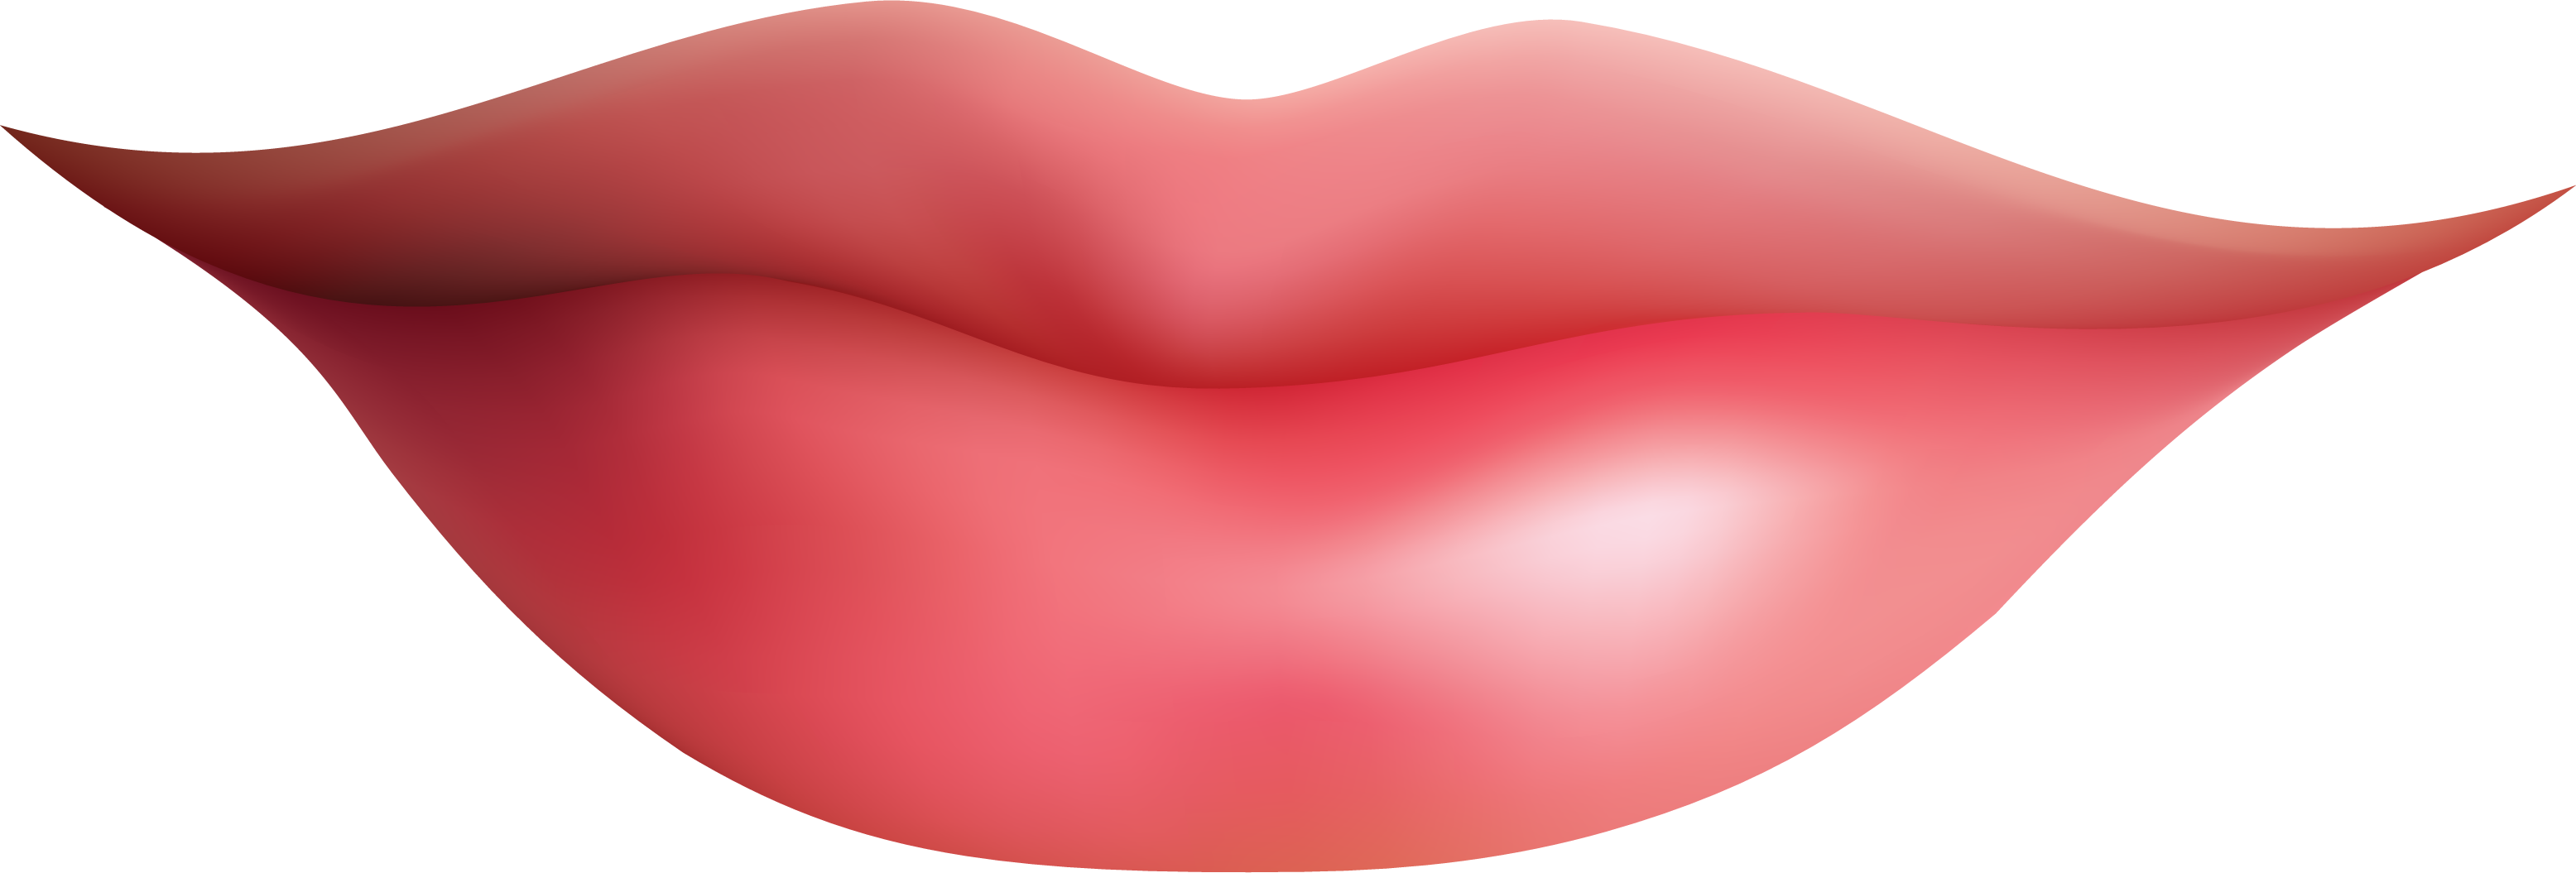 Mouth Lips Web Image Png Clipart